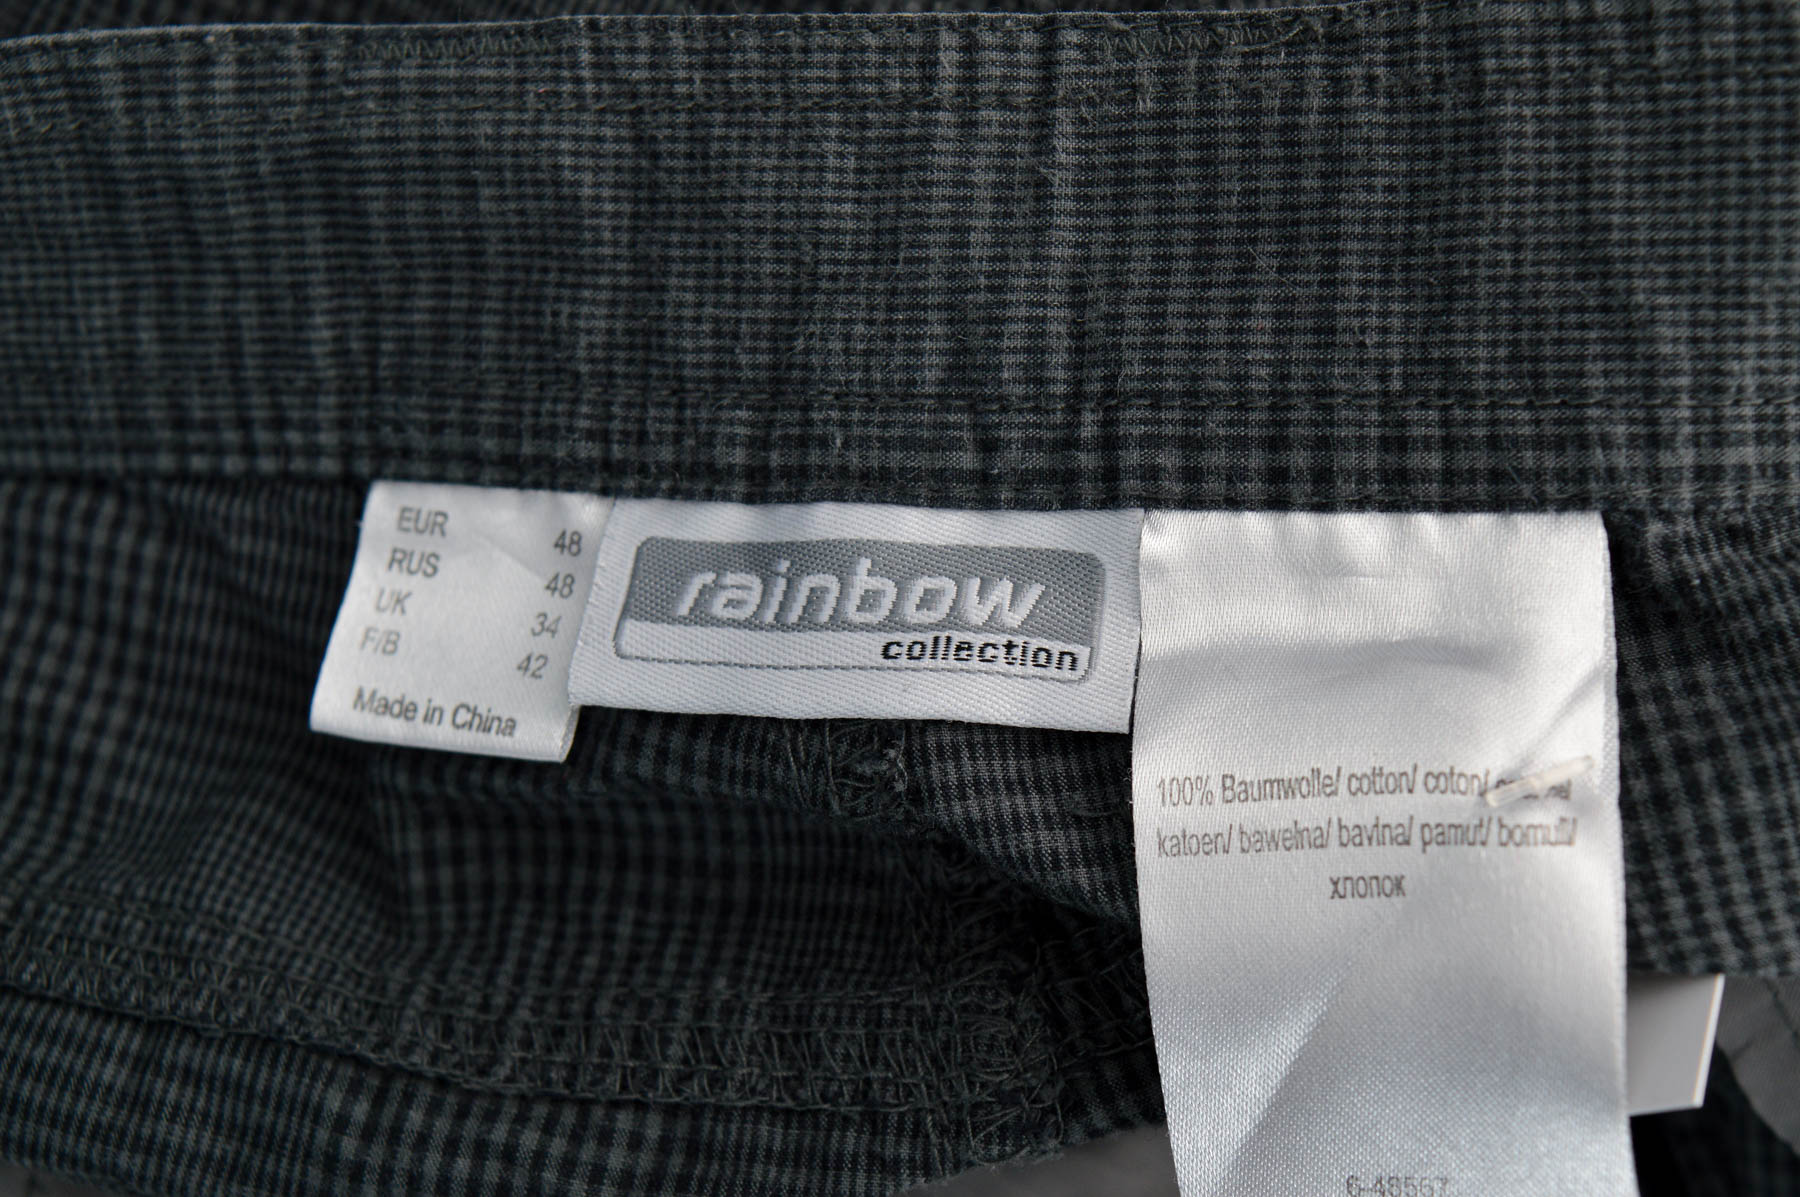 Men's trousers - Rainbow collection - 2